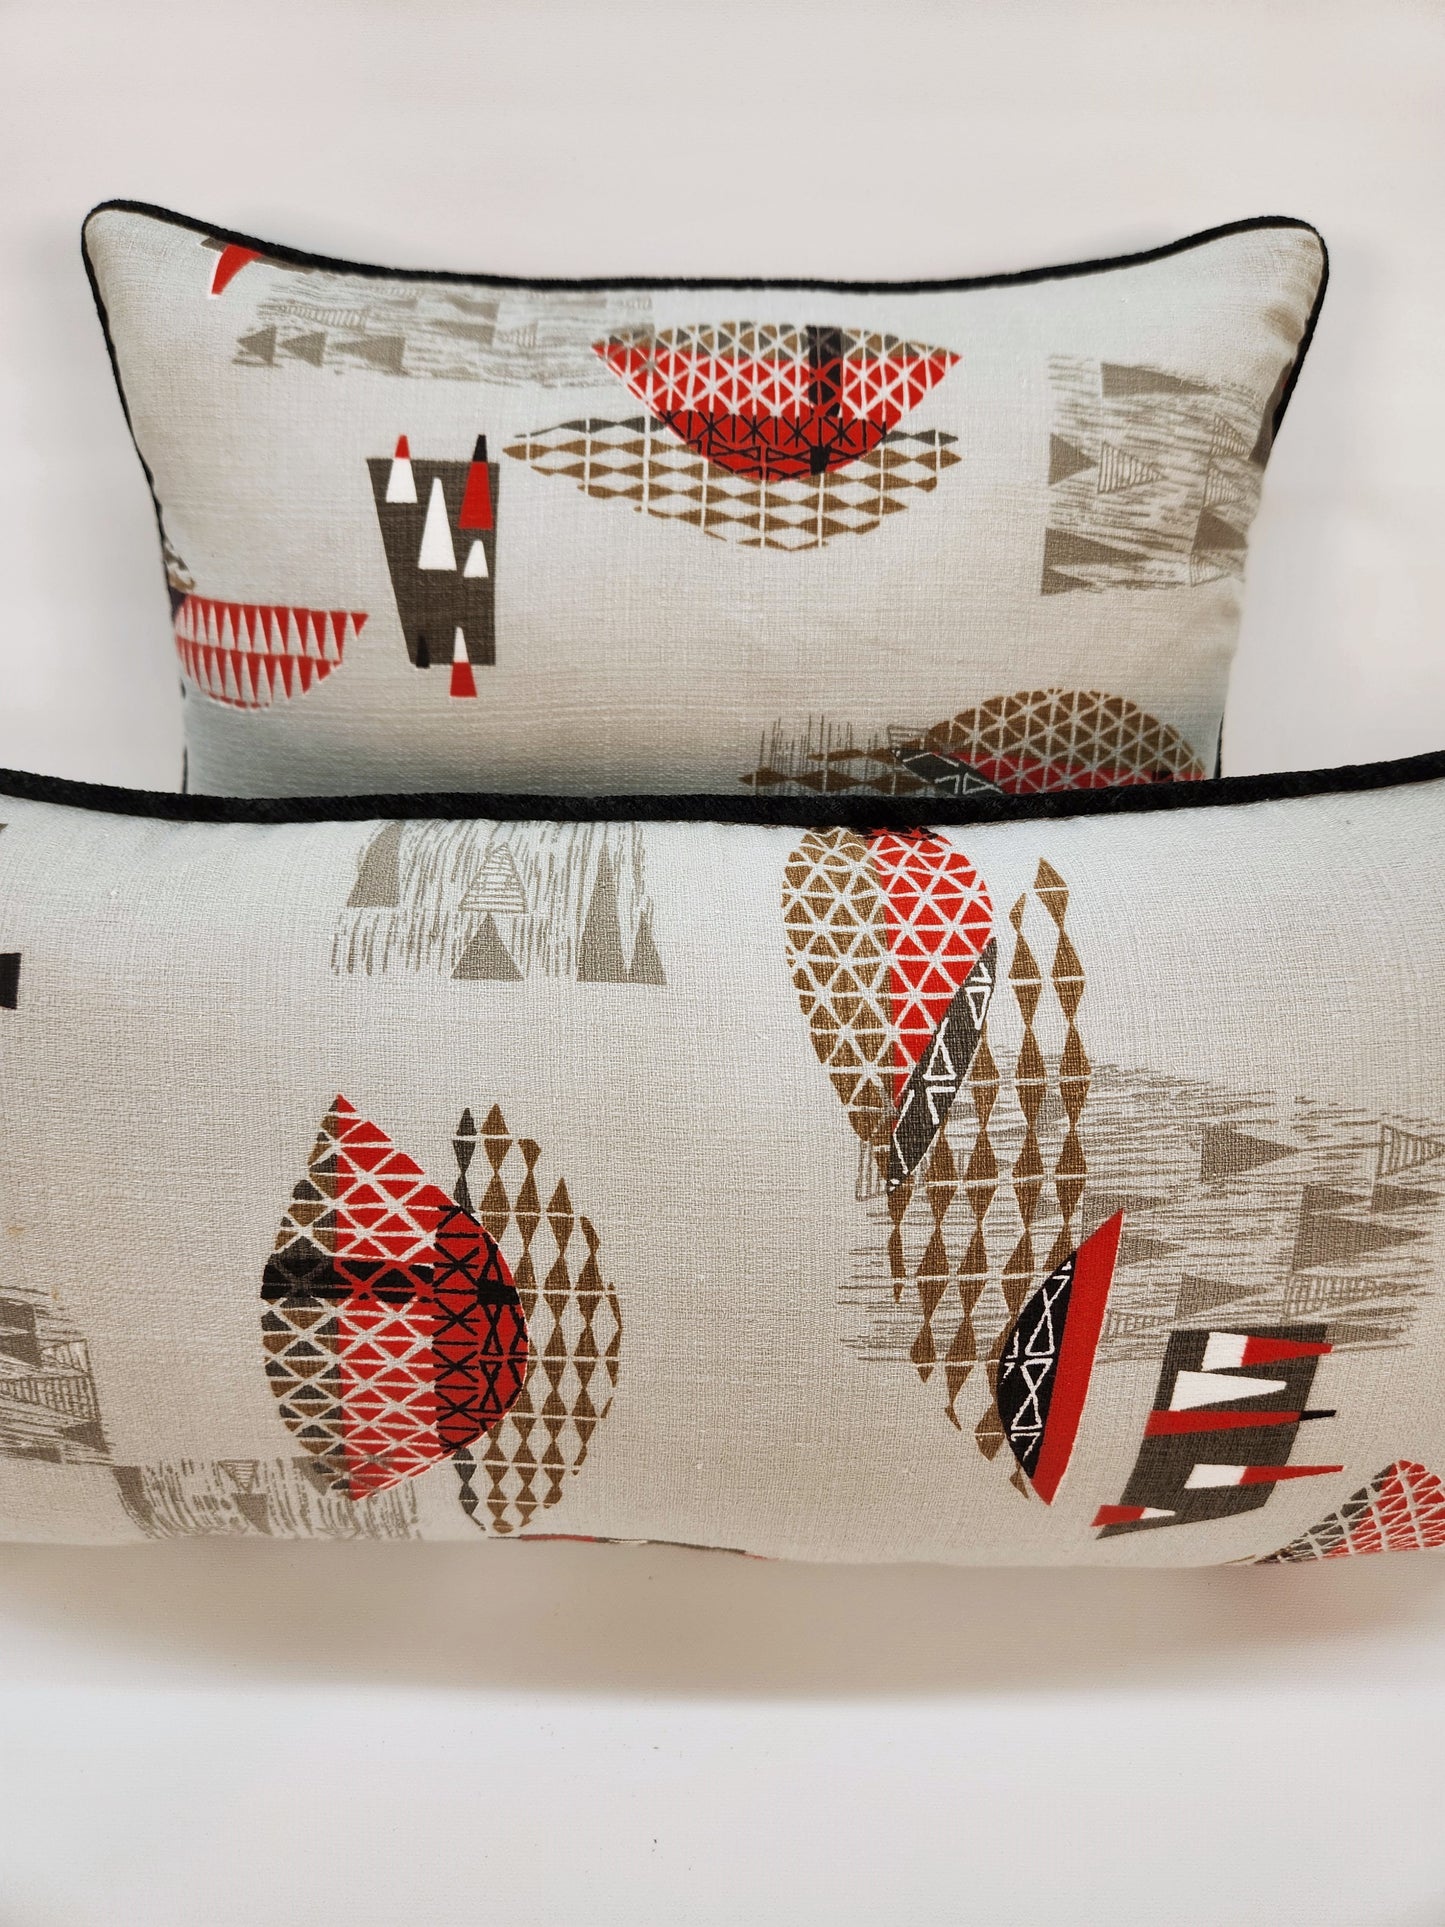 Atomic 1950s Vintage Barkcloth Fabric 12x18 Lumbar Pillow: Black, Red, Brown on Light Grey, Mid-Century-Modern, Only 3 Available